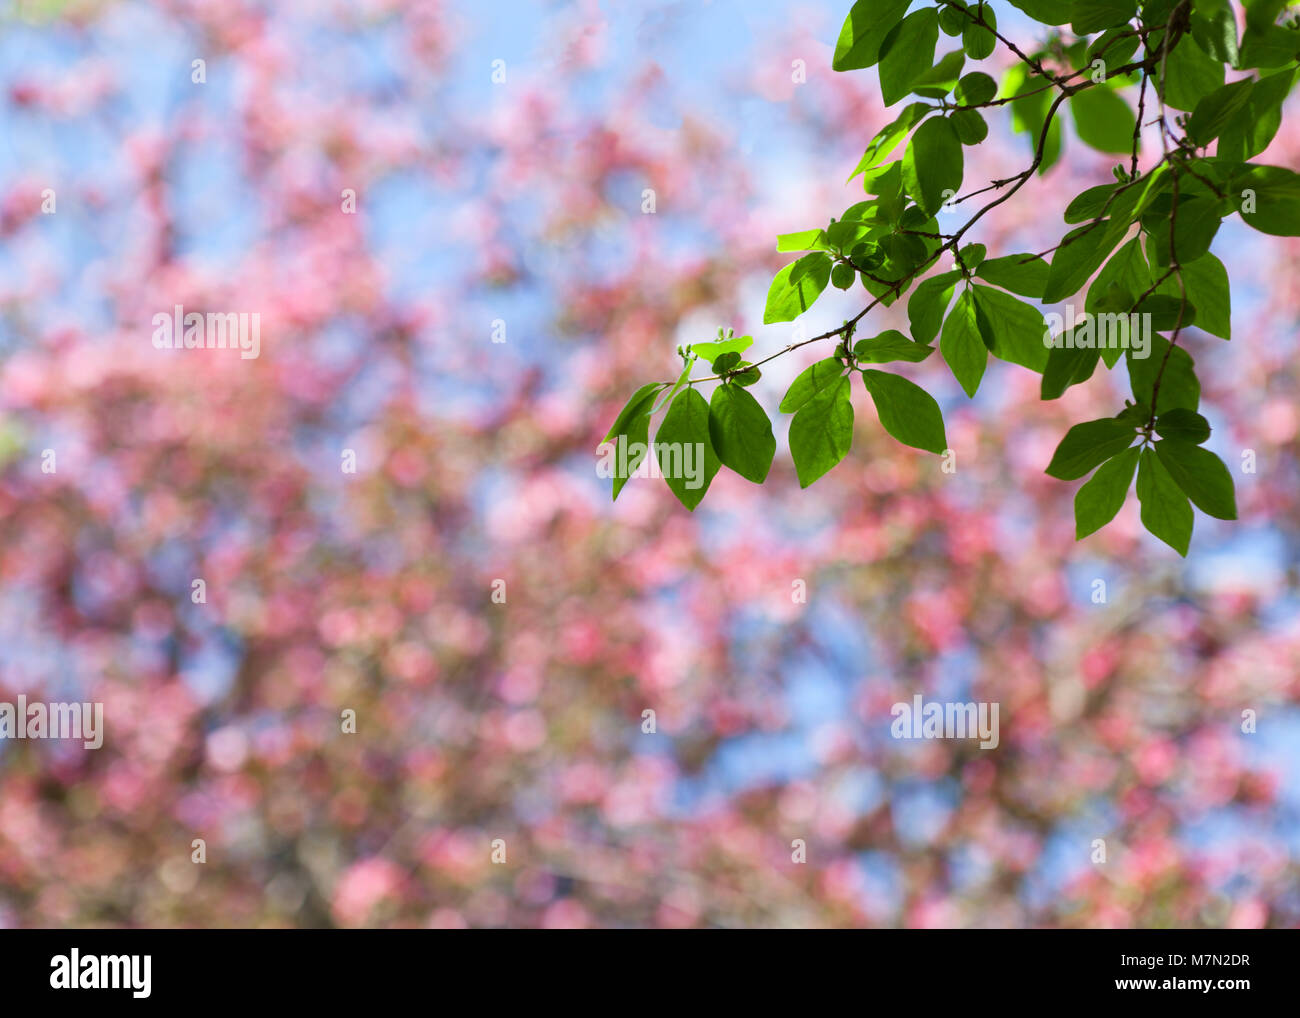 Spring blur background with green branch Stock Photo